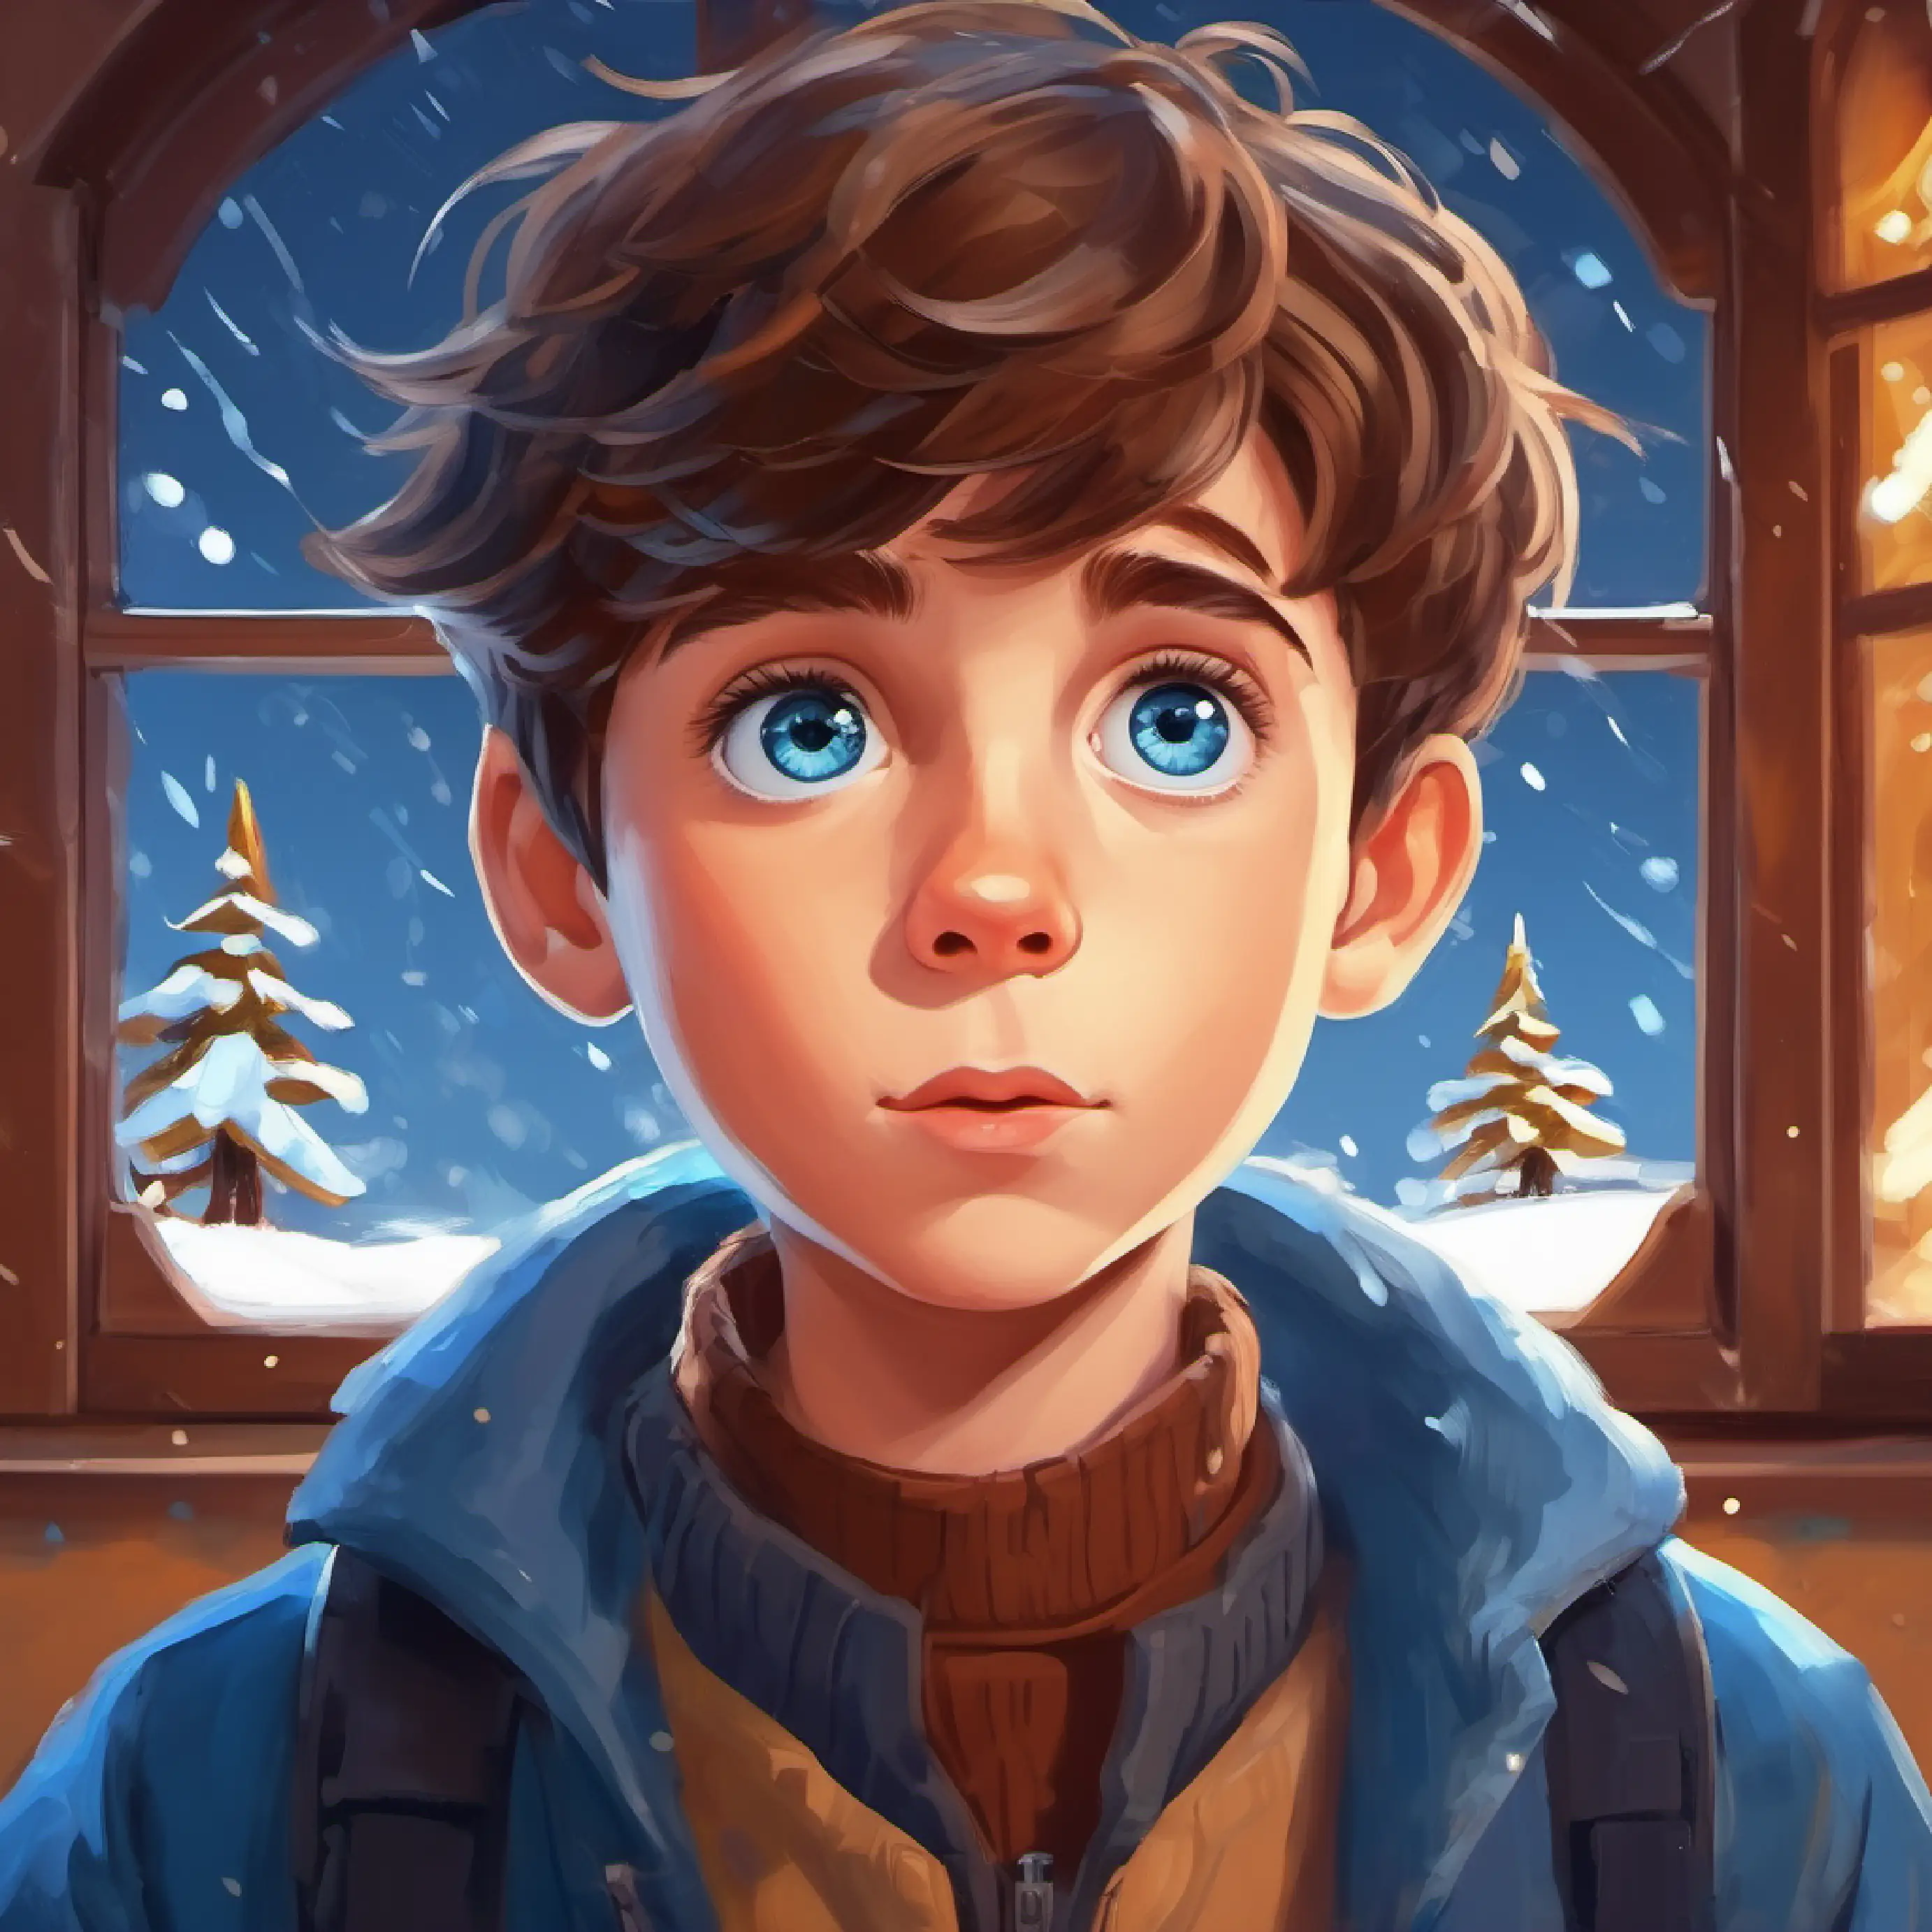 A change in the weather, A curious, adventurous boy with brown hair and blue eyes's initial reaction